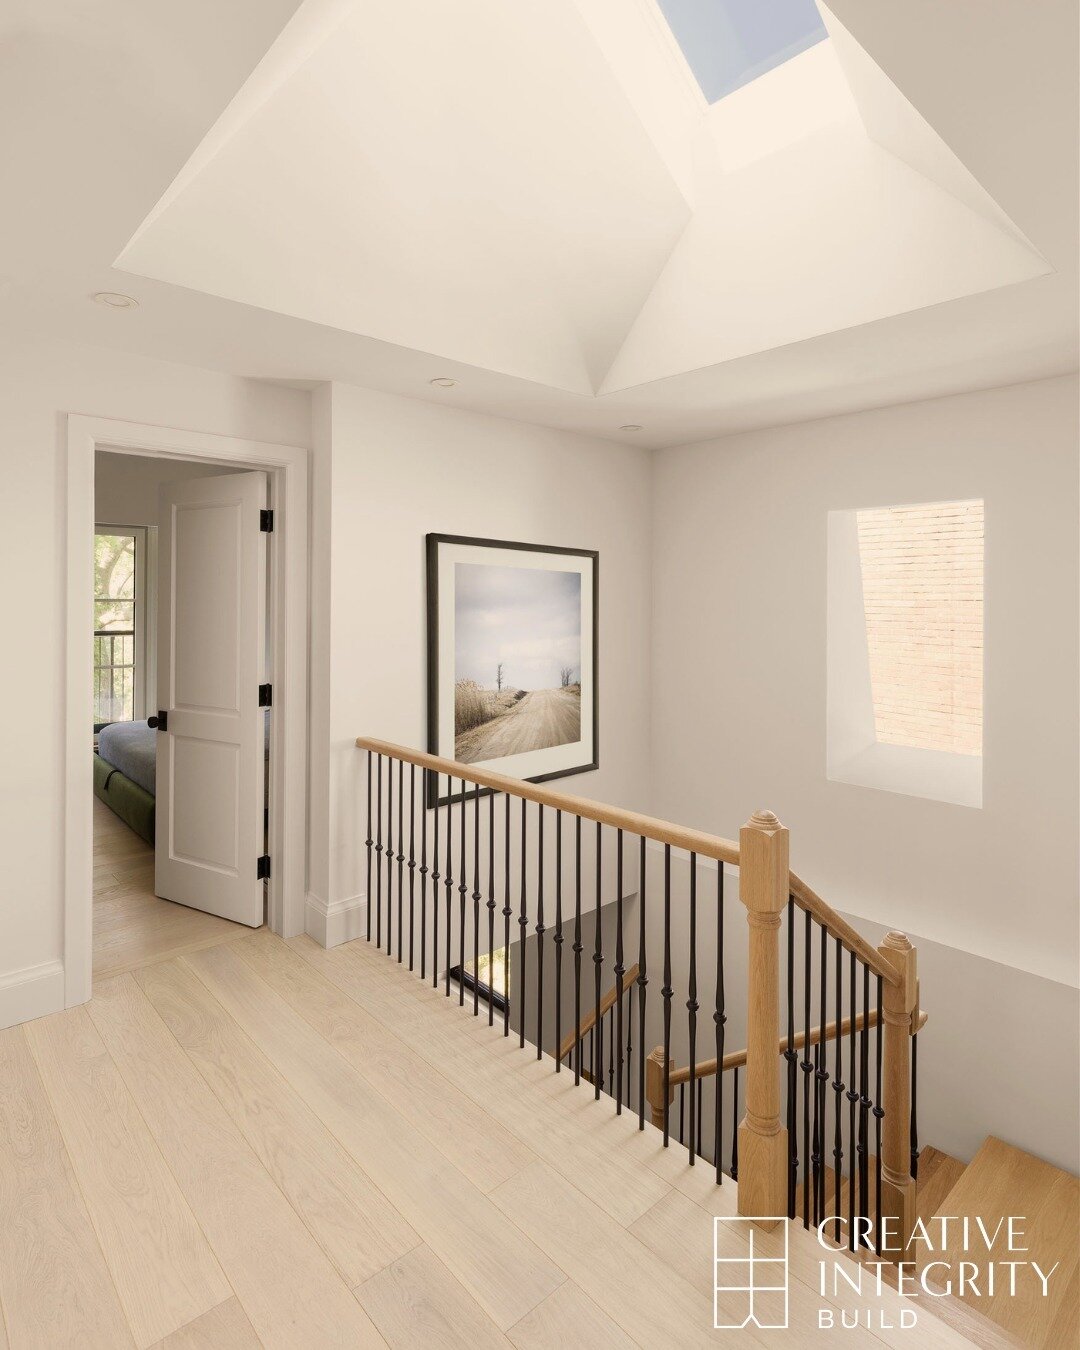 This gorgeous stair hall is practically made for mornings such as his one. Three bedrooms and two bathrooms, converging into this beautifully calm and sunlite space. Could there be a better, more inspiring way for a family to start their day? Coffee'